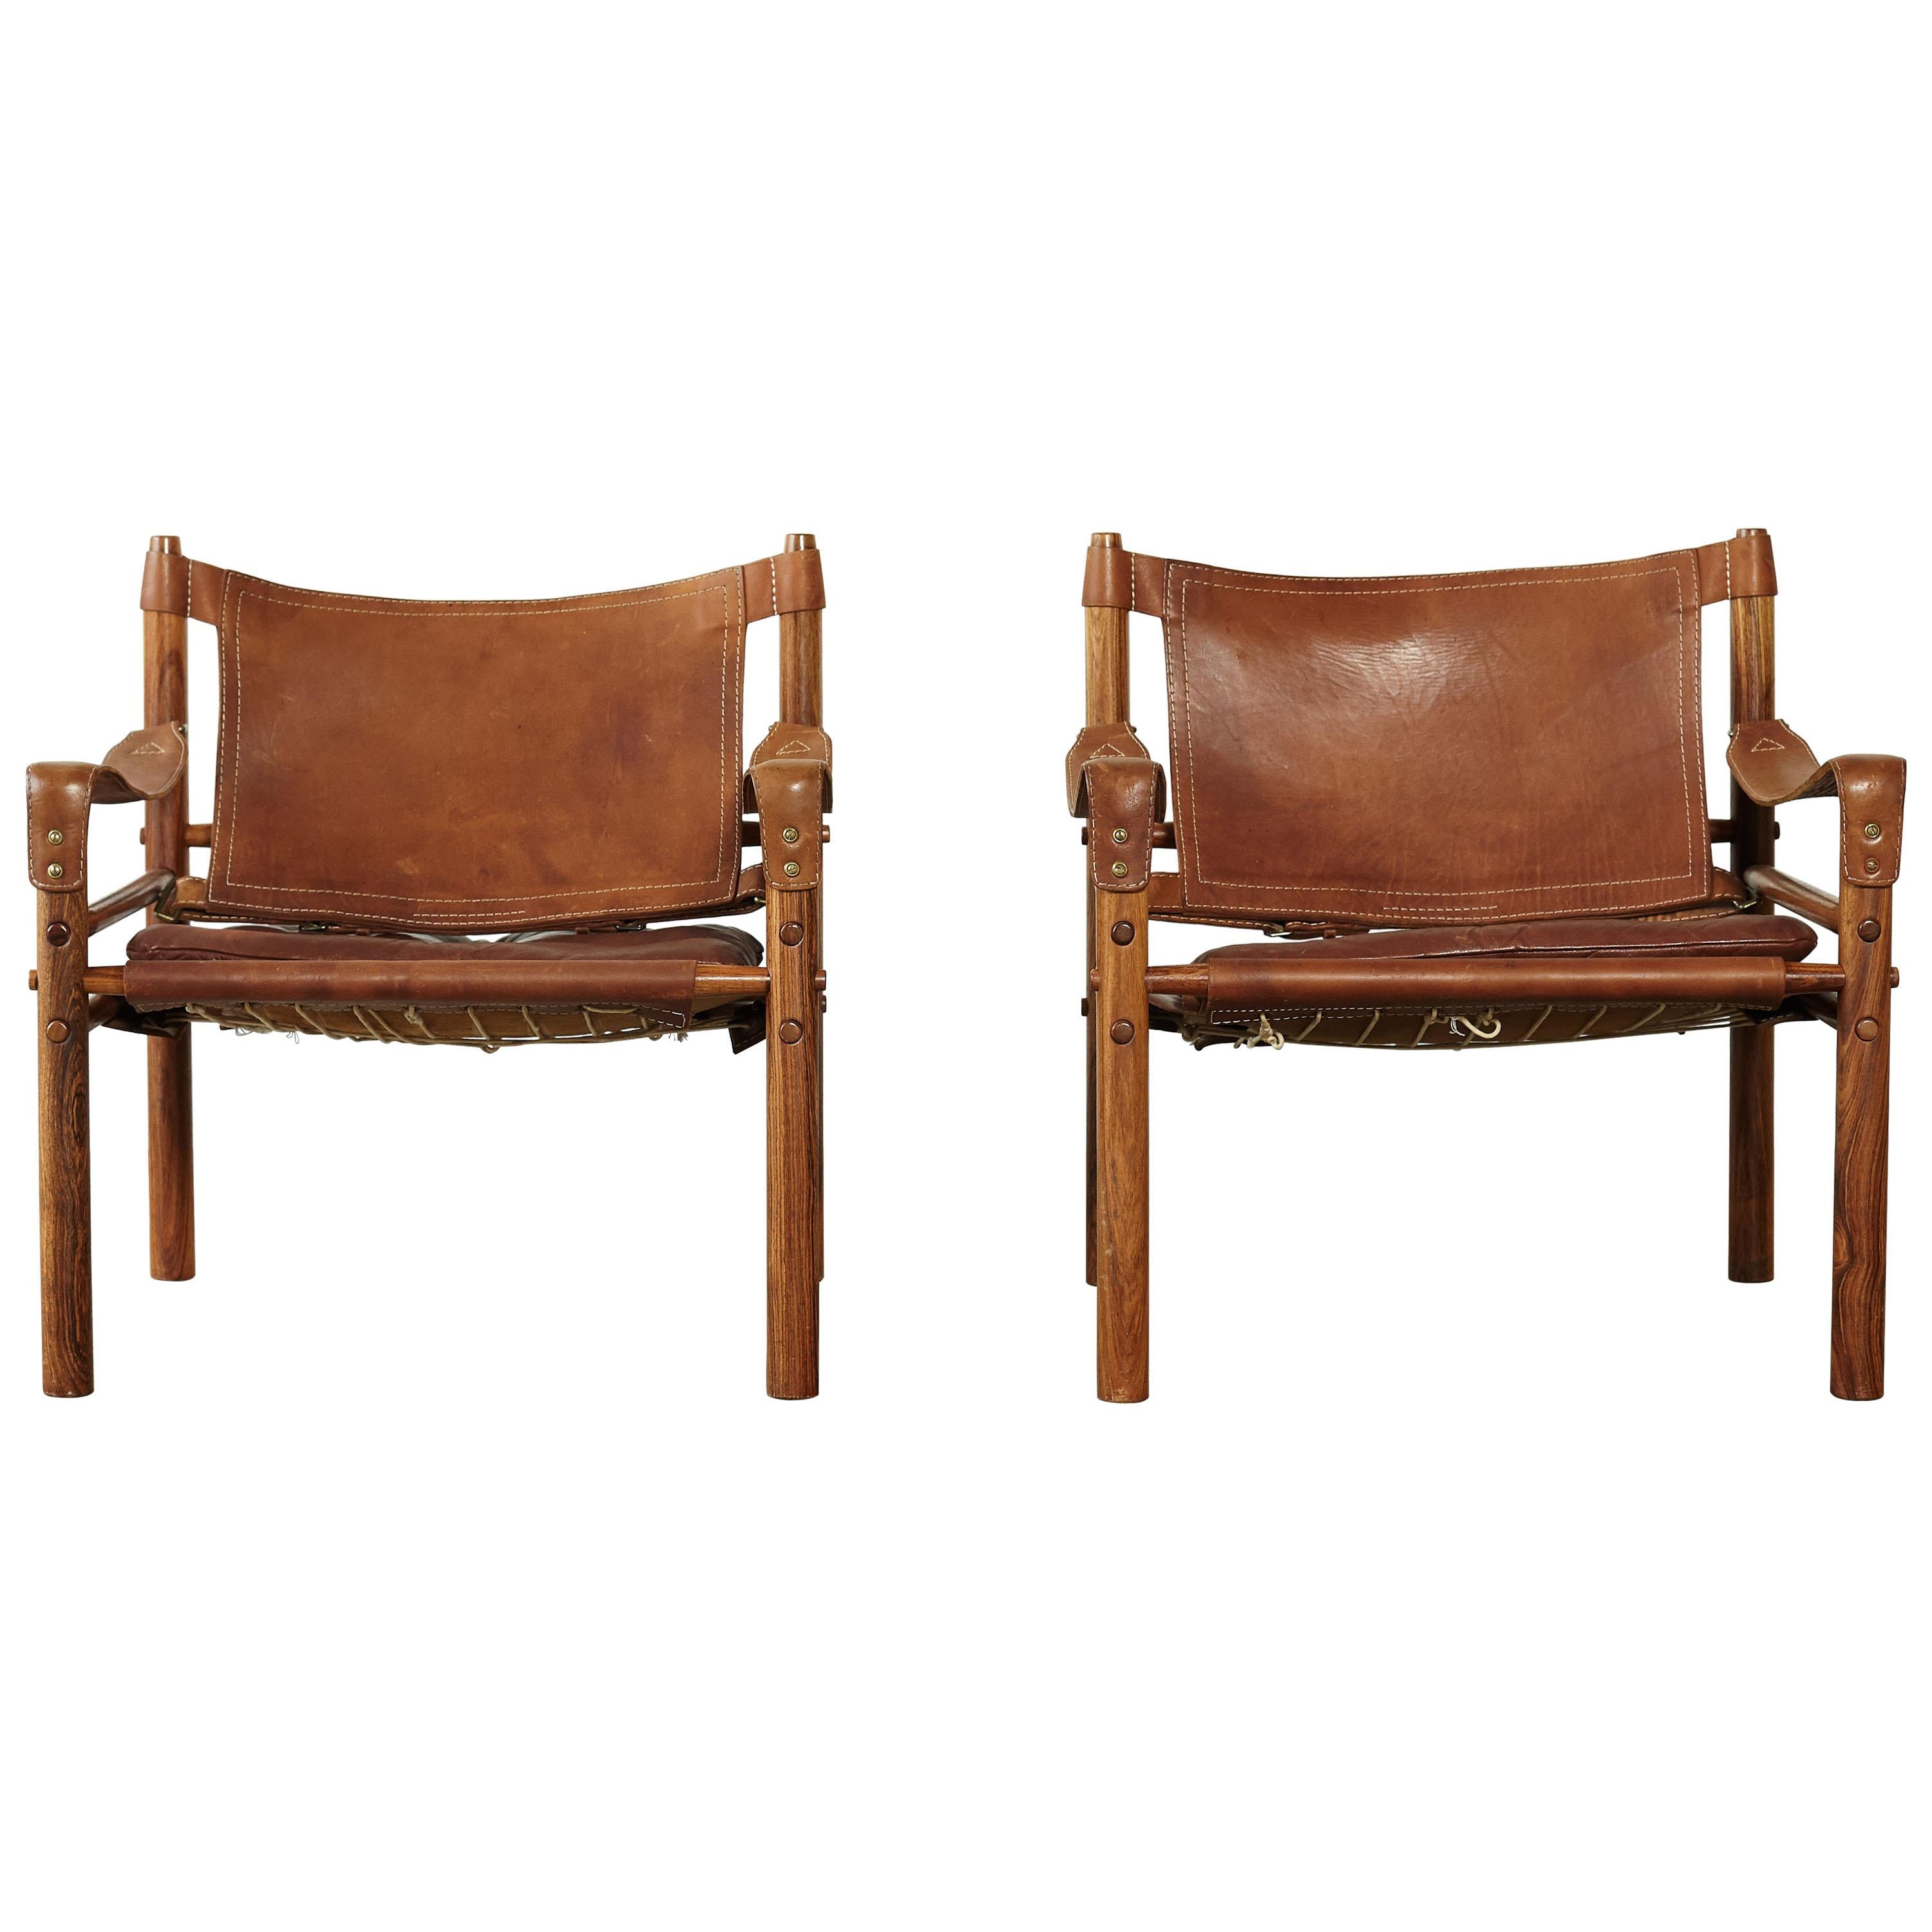 Pair of Arne Norell Rosewood Safari Chairs, Sweden, 1970s